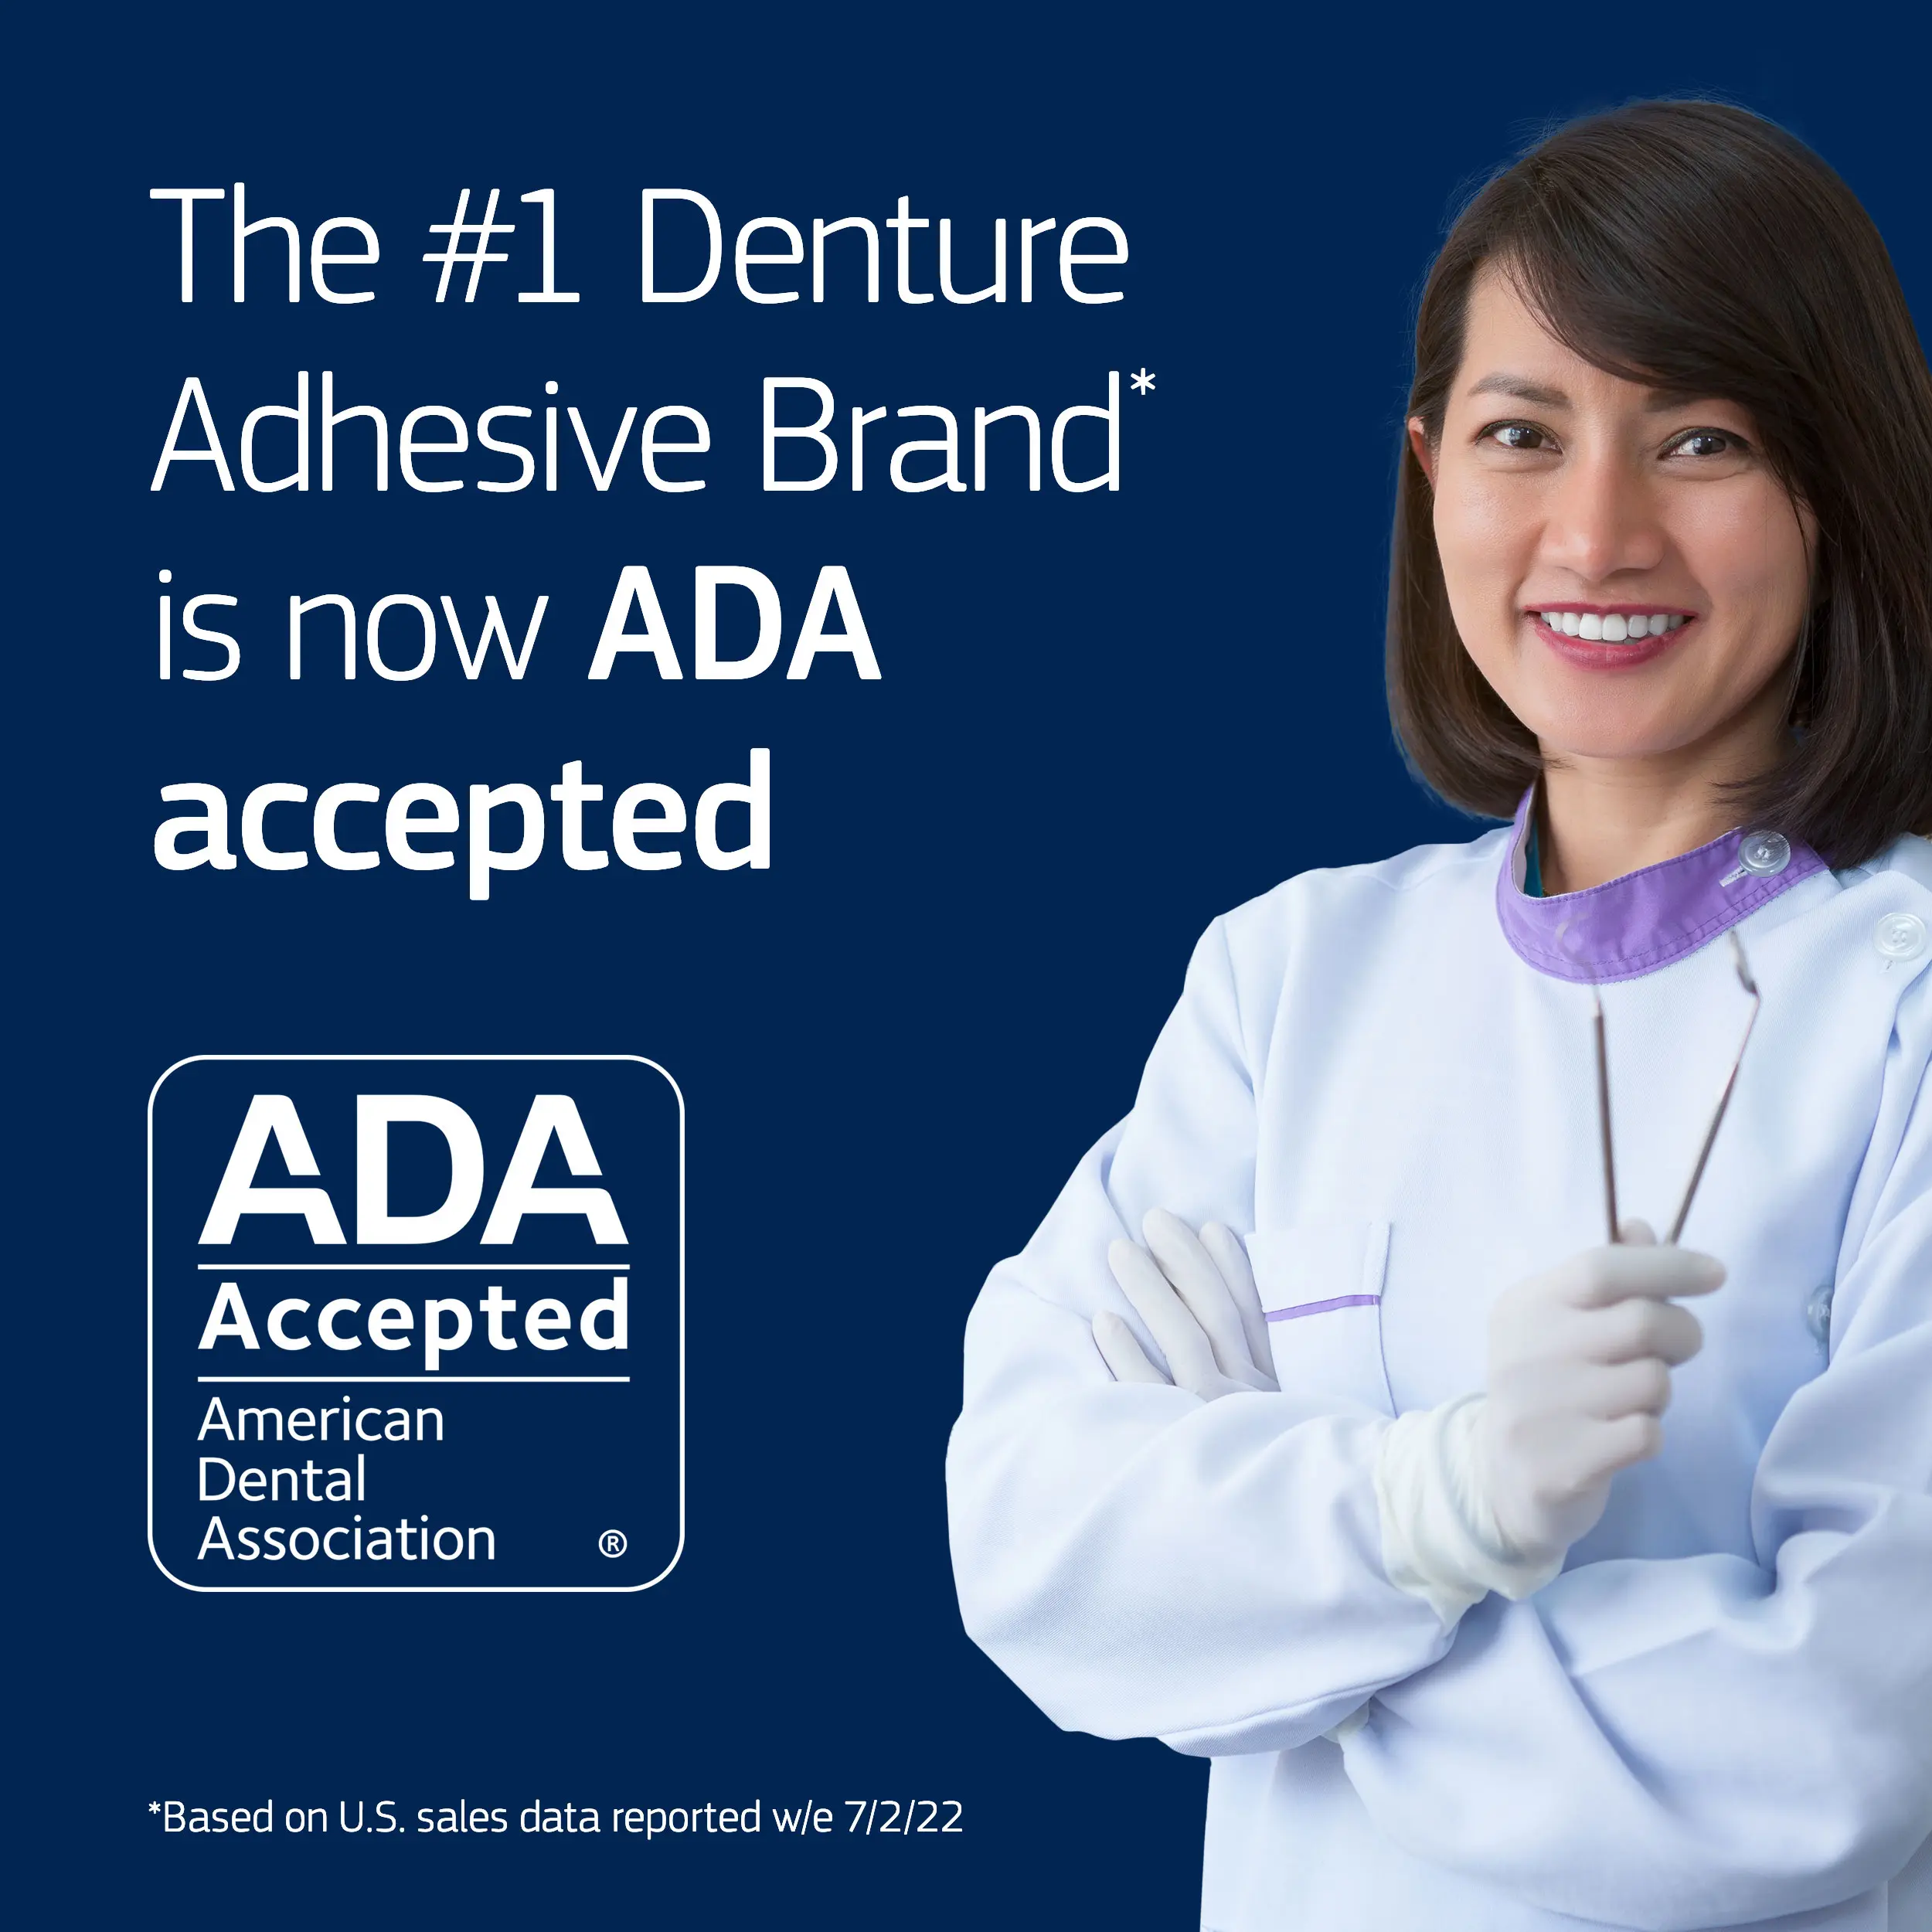 Fixodent Professional - The number 1 denture adhesive brand is ADA accepted